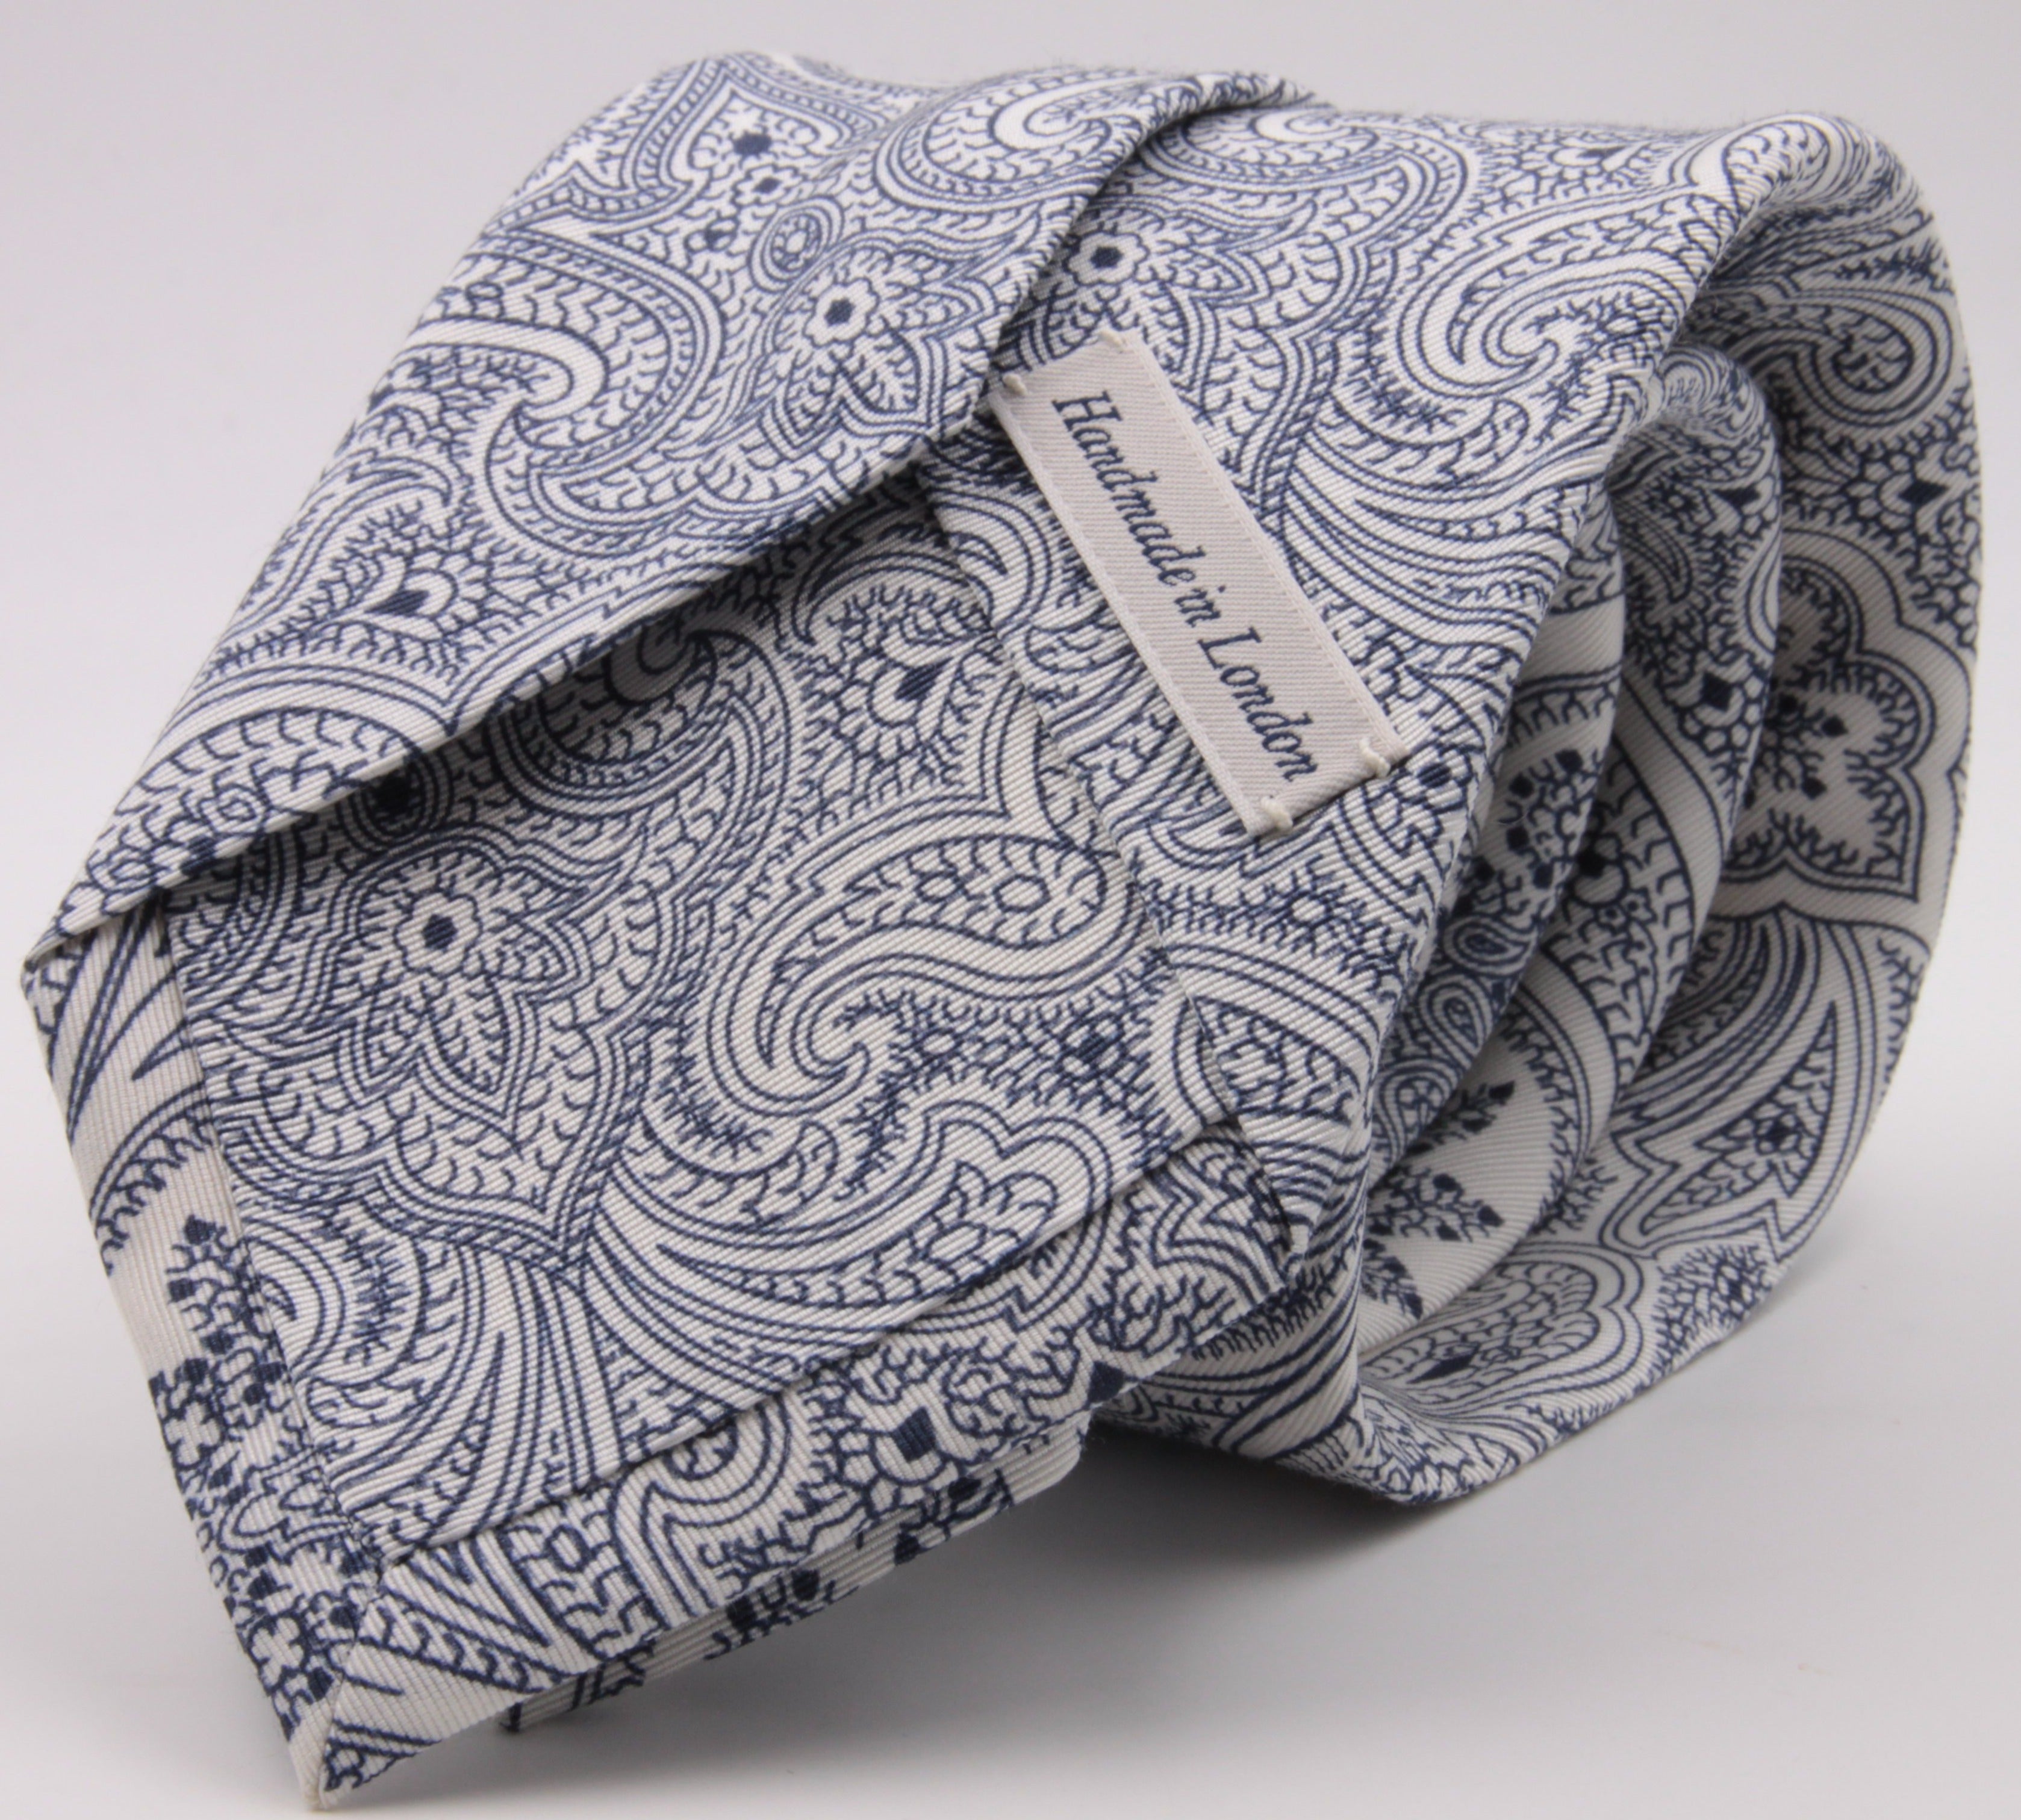 Drake's for Cruciani e Bella Printed 60% Silk 40% Cotton Self-Tipped White and Blue Paysley Motif Tie Handmade in London, England 8 cm x 149 cm #5416